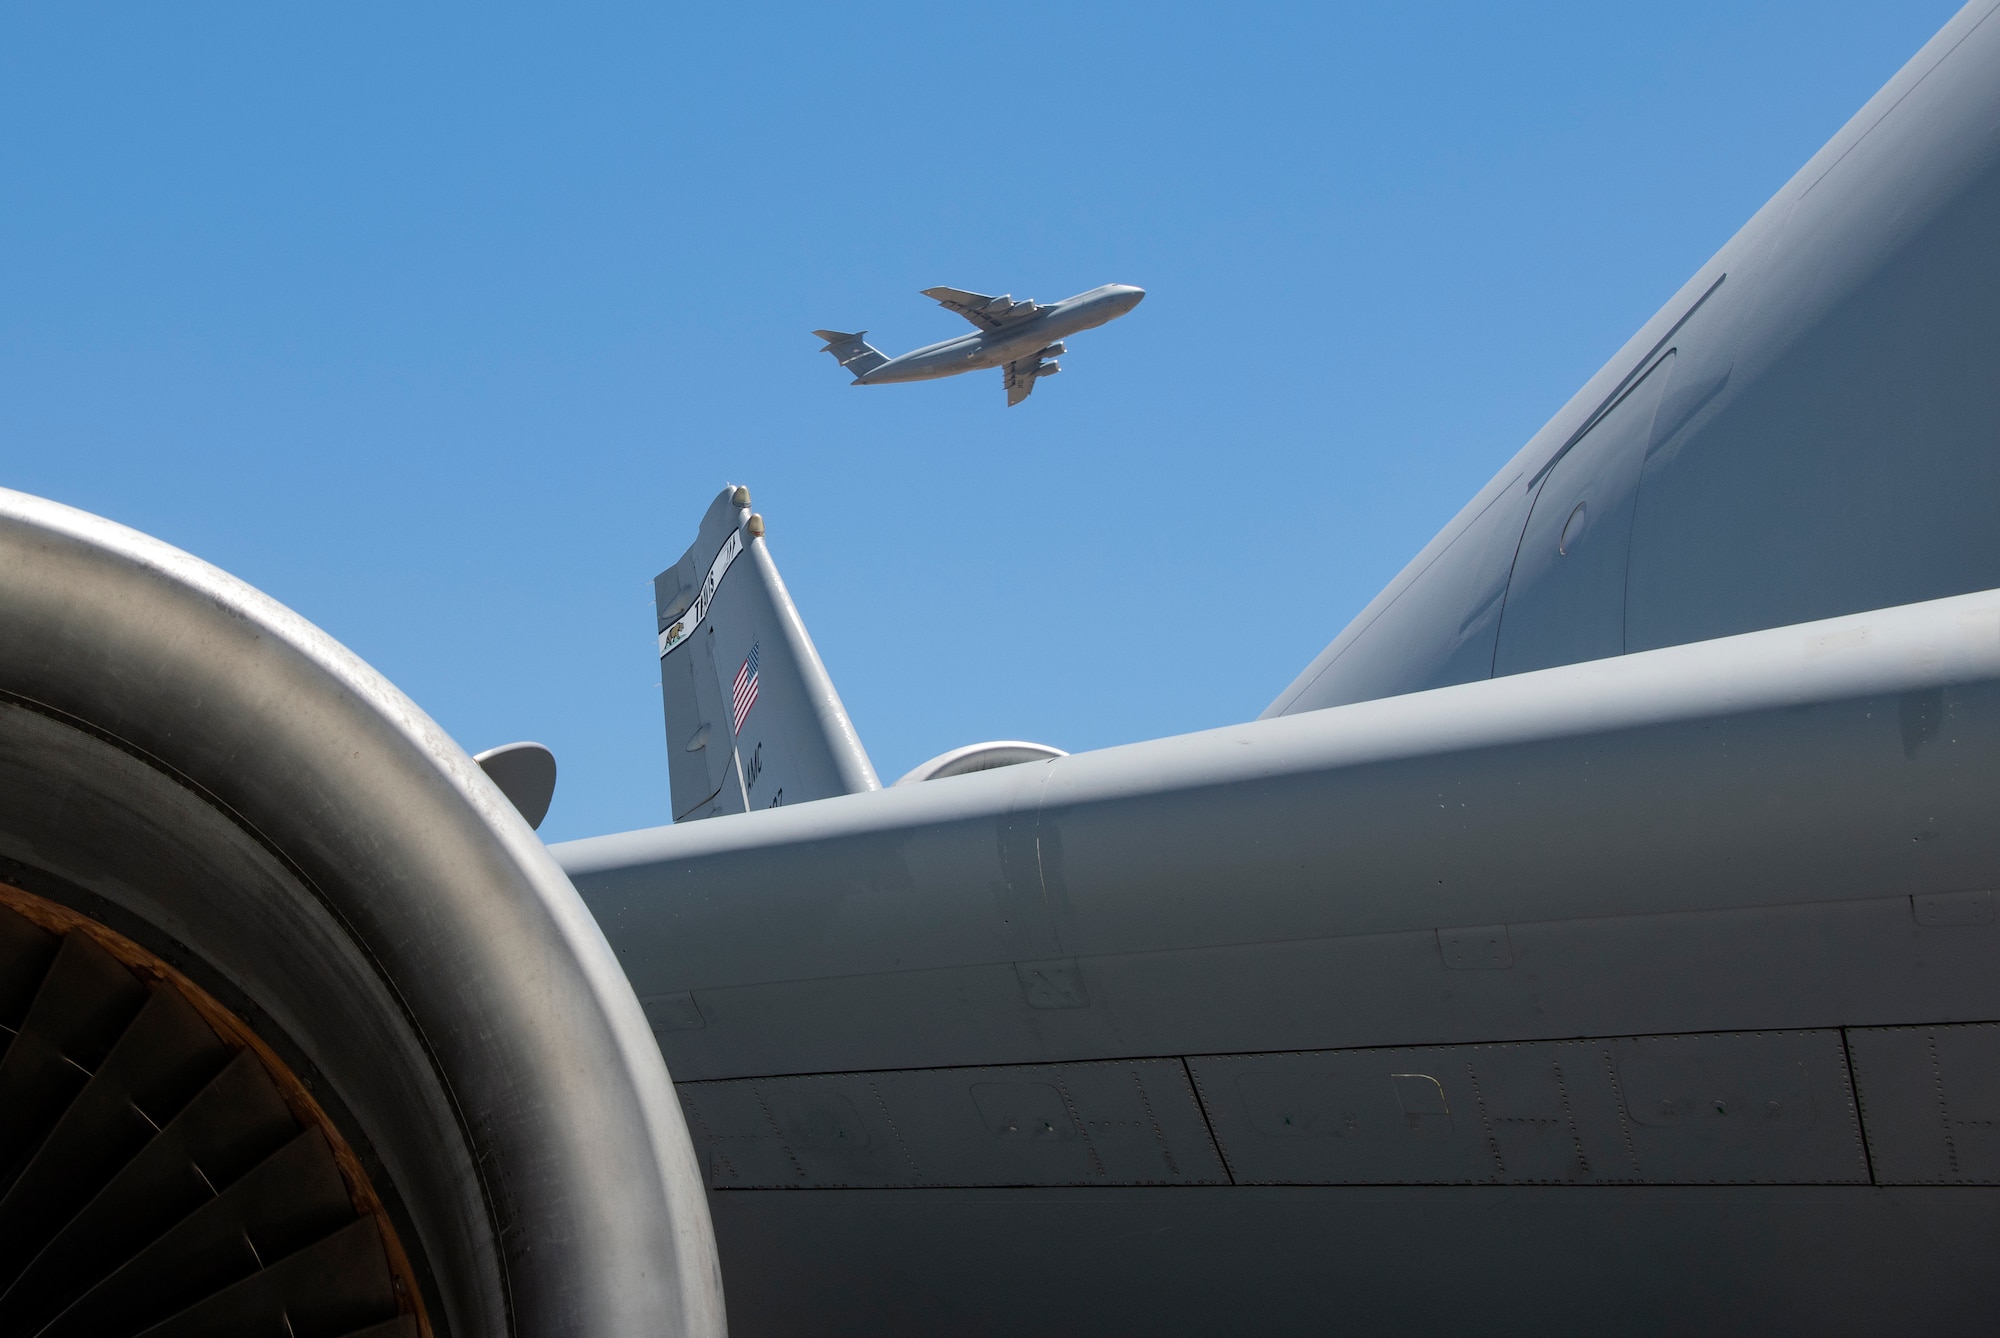 A KC-10 Extender is seen in the foreground of a departing C-5M Super Galaxy July 11, 2019, at Travis Air Force Base, California. With roughly 3,300 aircraft continuously arriving and departing on a monthly basis, Travis handles more cargo and passenger traffic than any other military air terminal in the United States. (U.S. Air Force photo by Heide Couch)